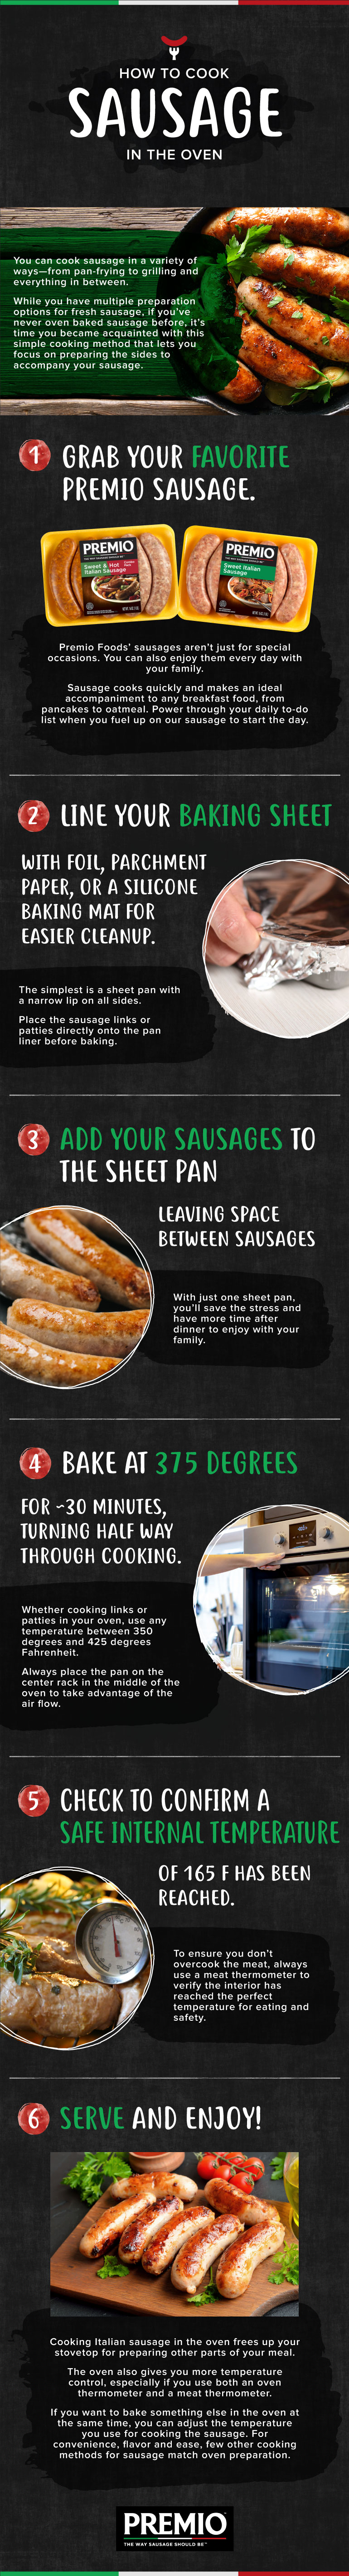 https://www.premiofoods.com/content/uploads/2021/12/How-to-Cook-Sausage-in-the-Oven.jpg